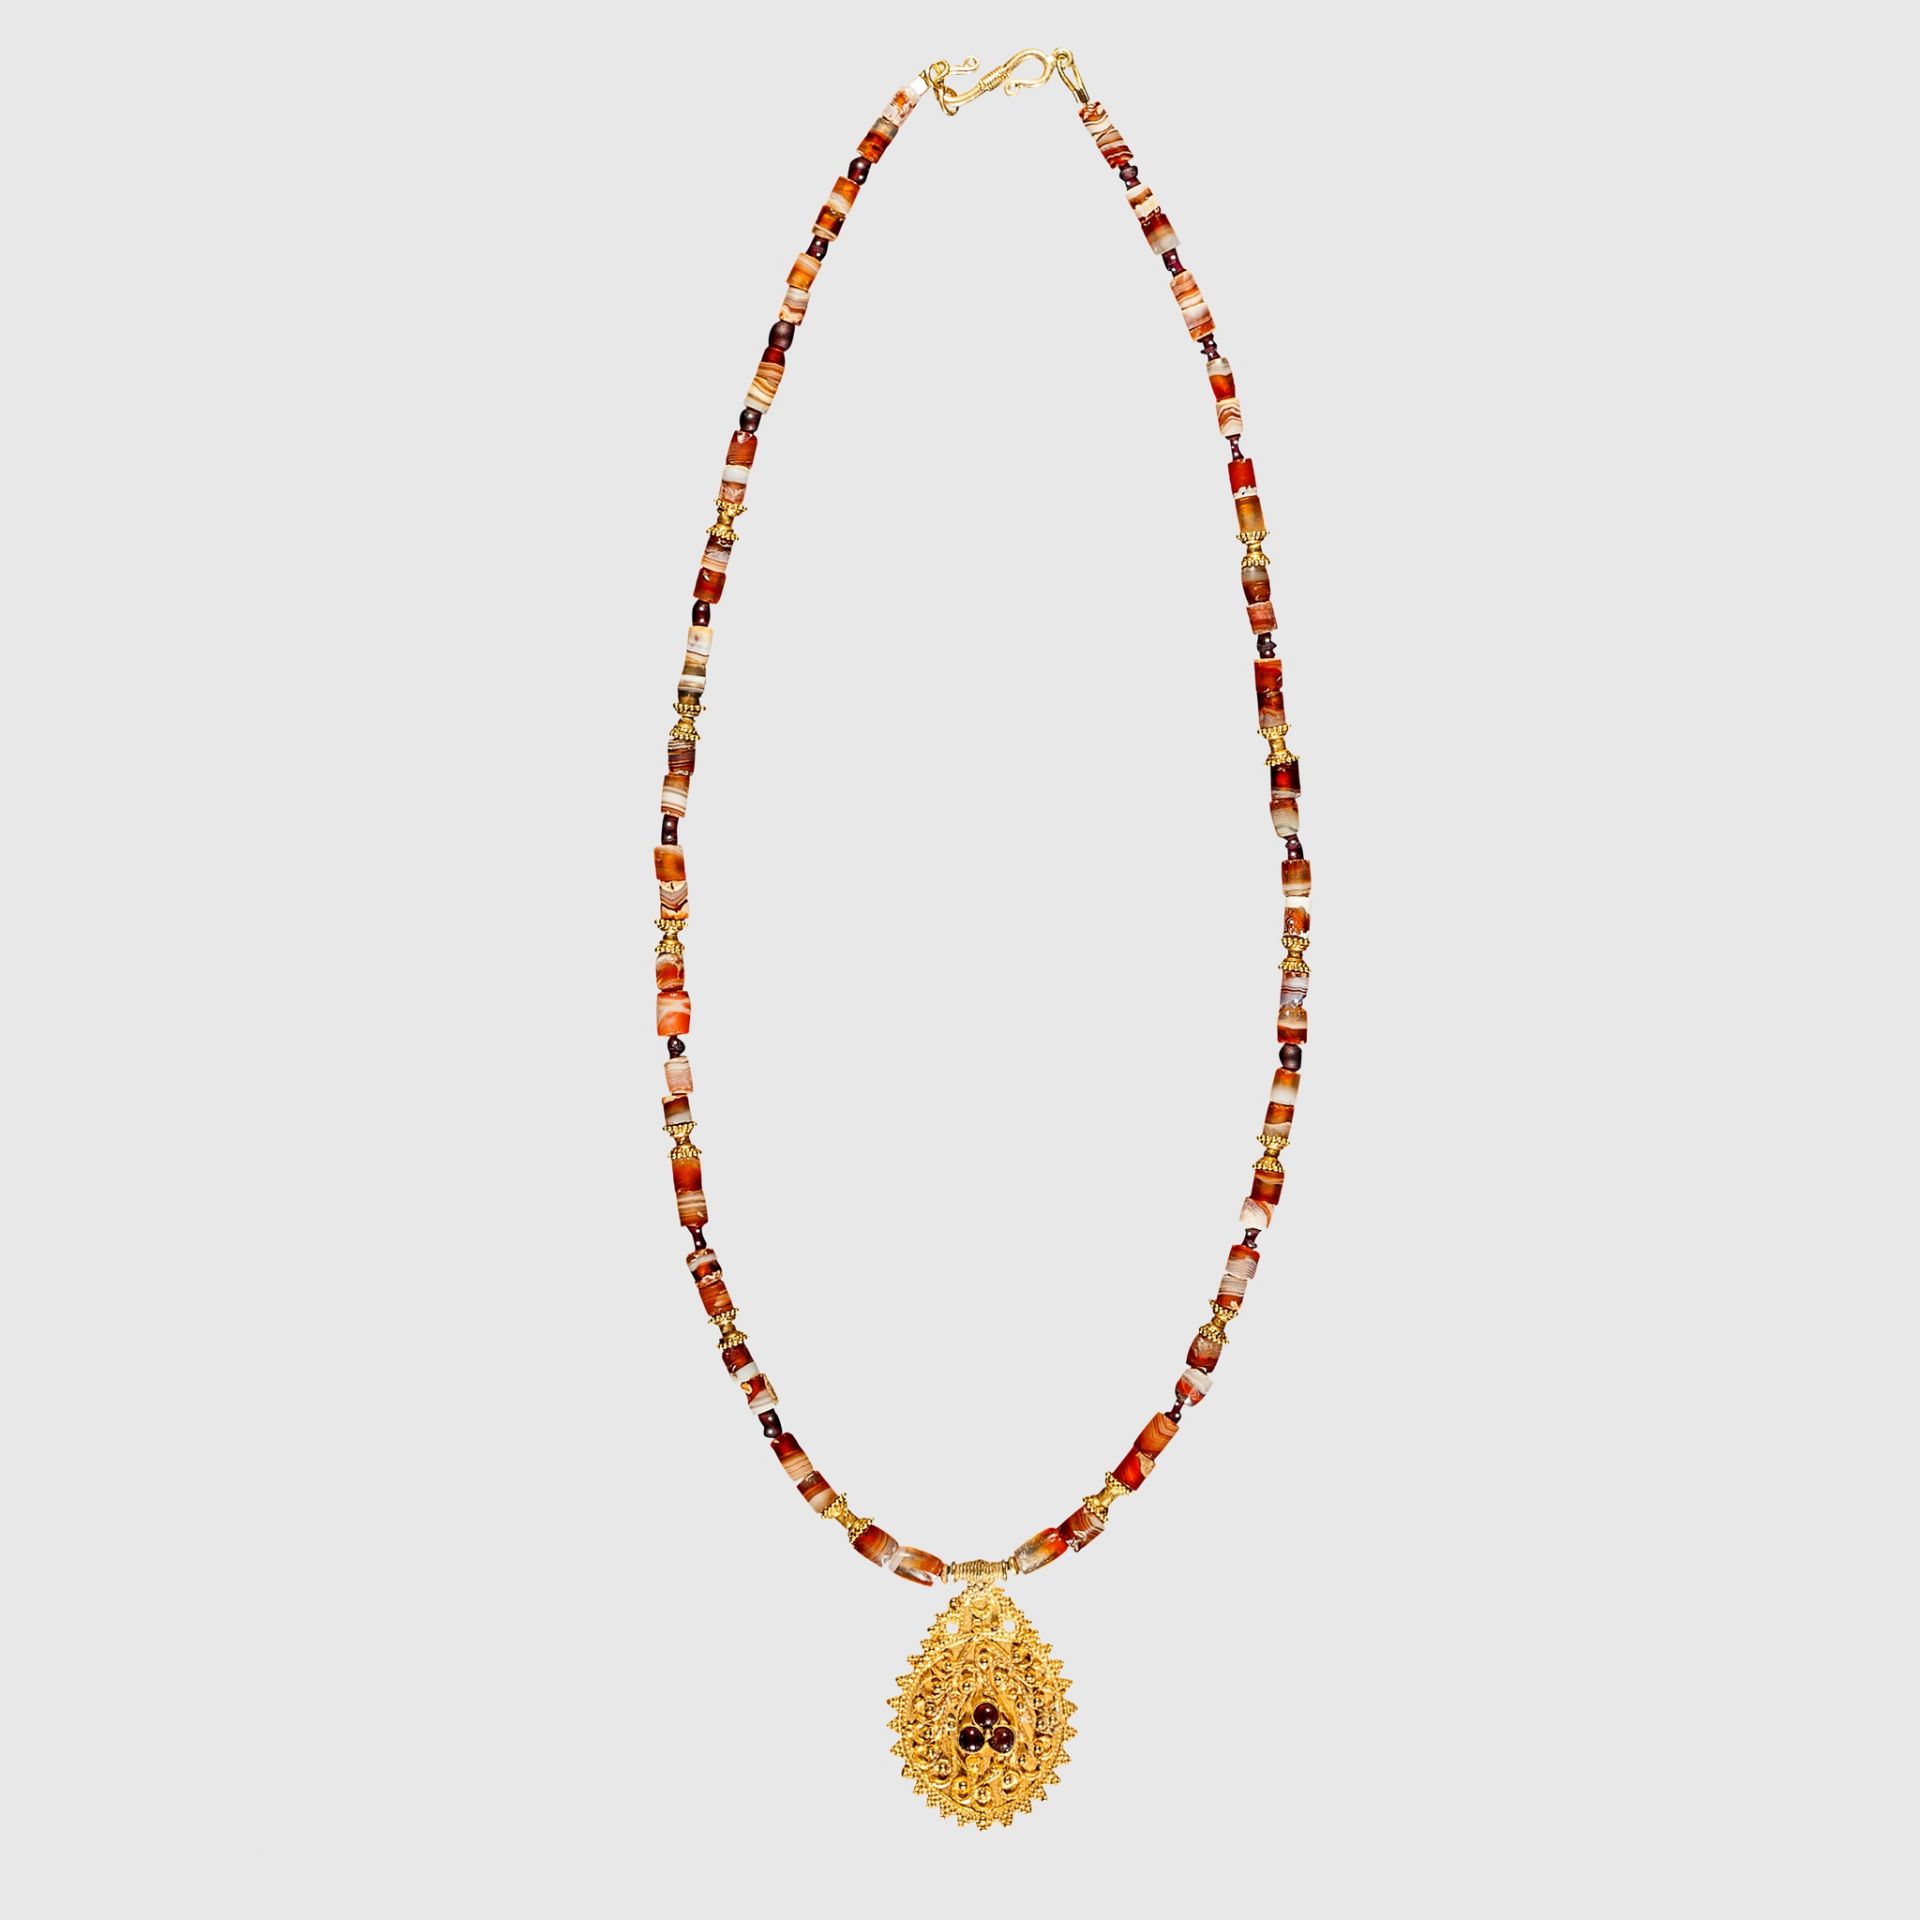 HELLENISTIC AGATE NECKLACE WITH GOLD PENDANT EASTERN MEDITERRANEAN, 3RD - 1ST CENTURY B.C.